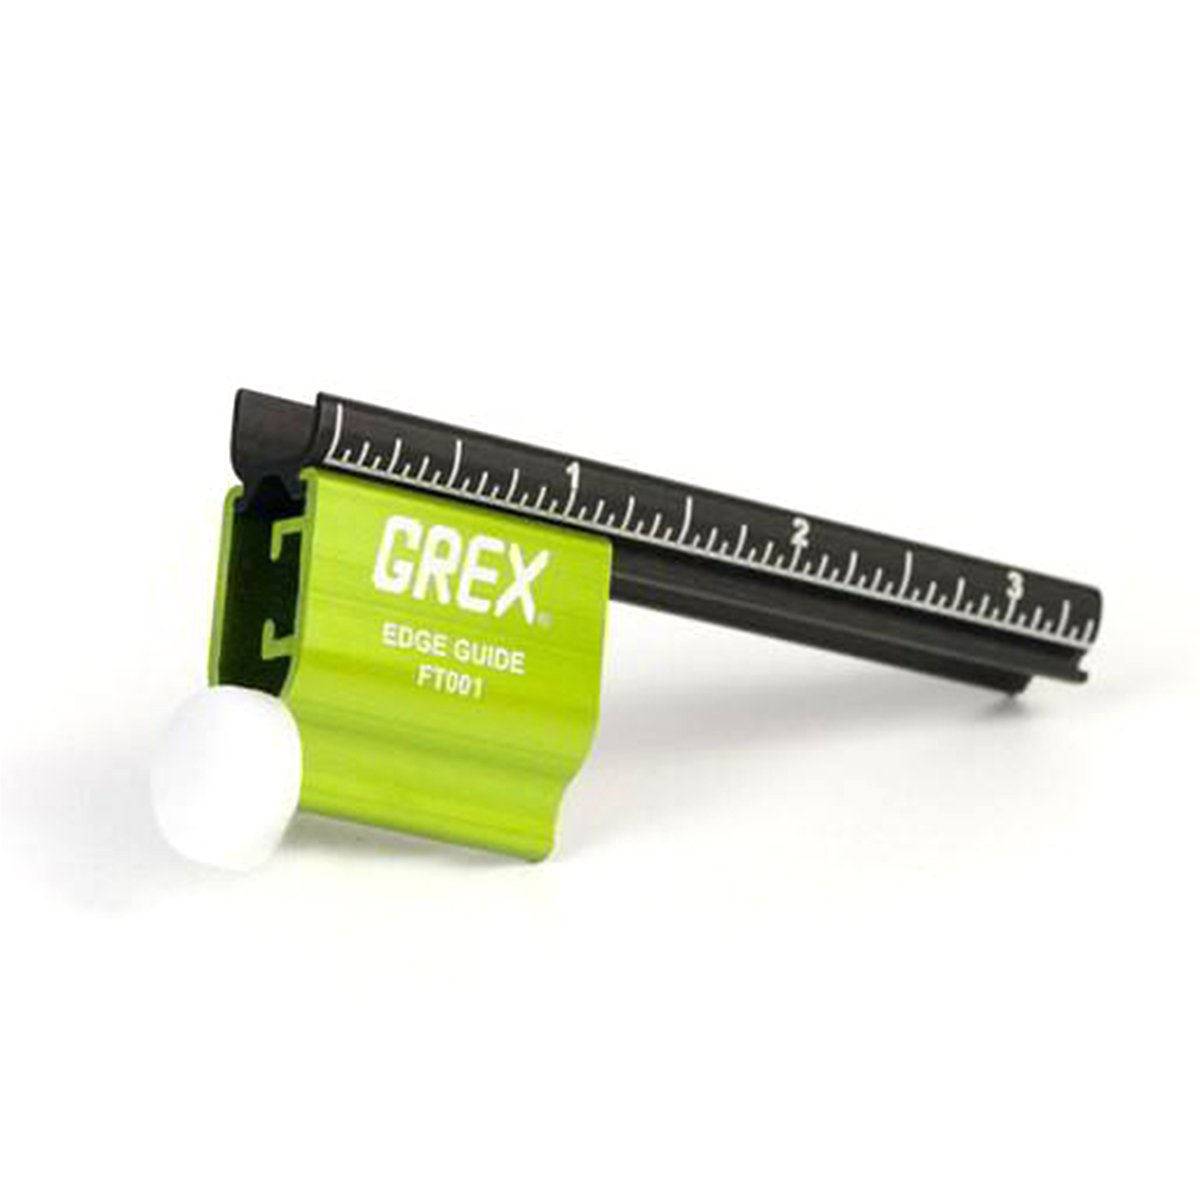 Grex Edge Guide for pinners and nailers has a scale for convenient setting and white non-marring pad on green body.